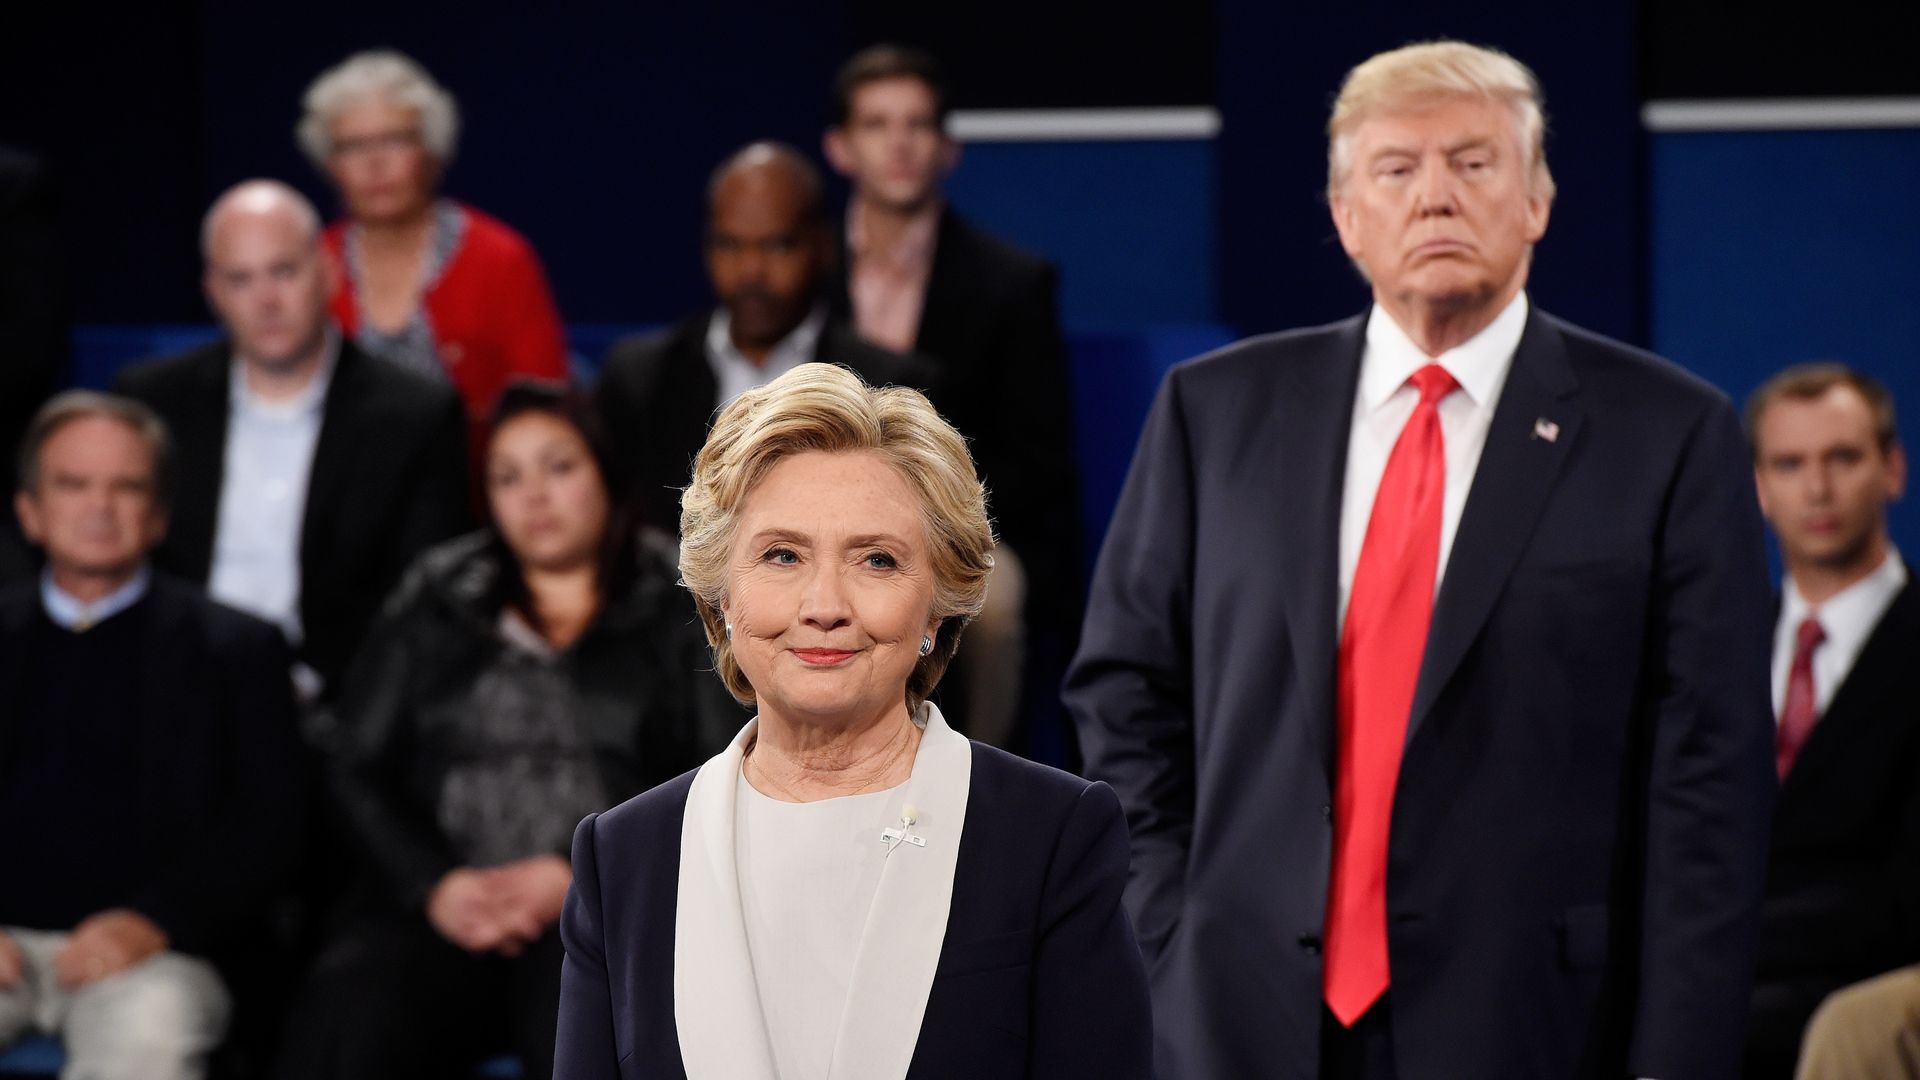 Hillary Clinton (L) and Donald Trump listen during the town hall debate at Washington University on October 9, 2016 in St Louis, Missouri. 